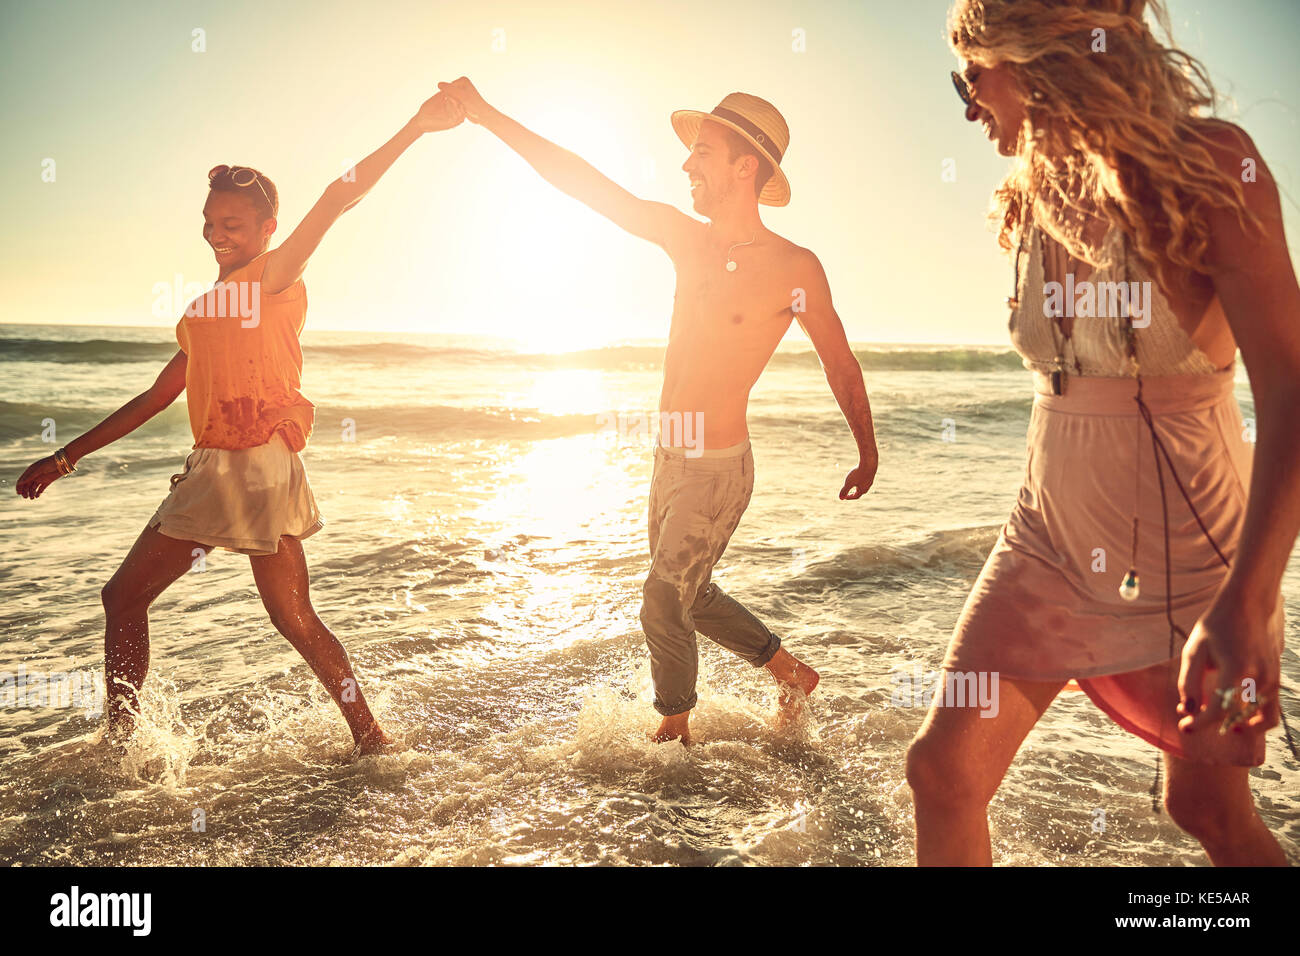 Playful young friends splashing in sunny summer ocean surf Stock Photo